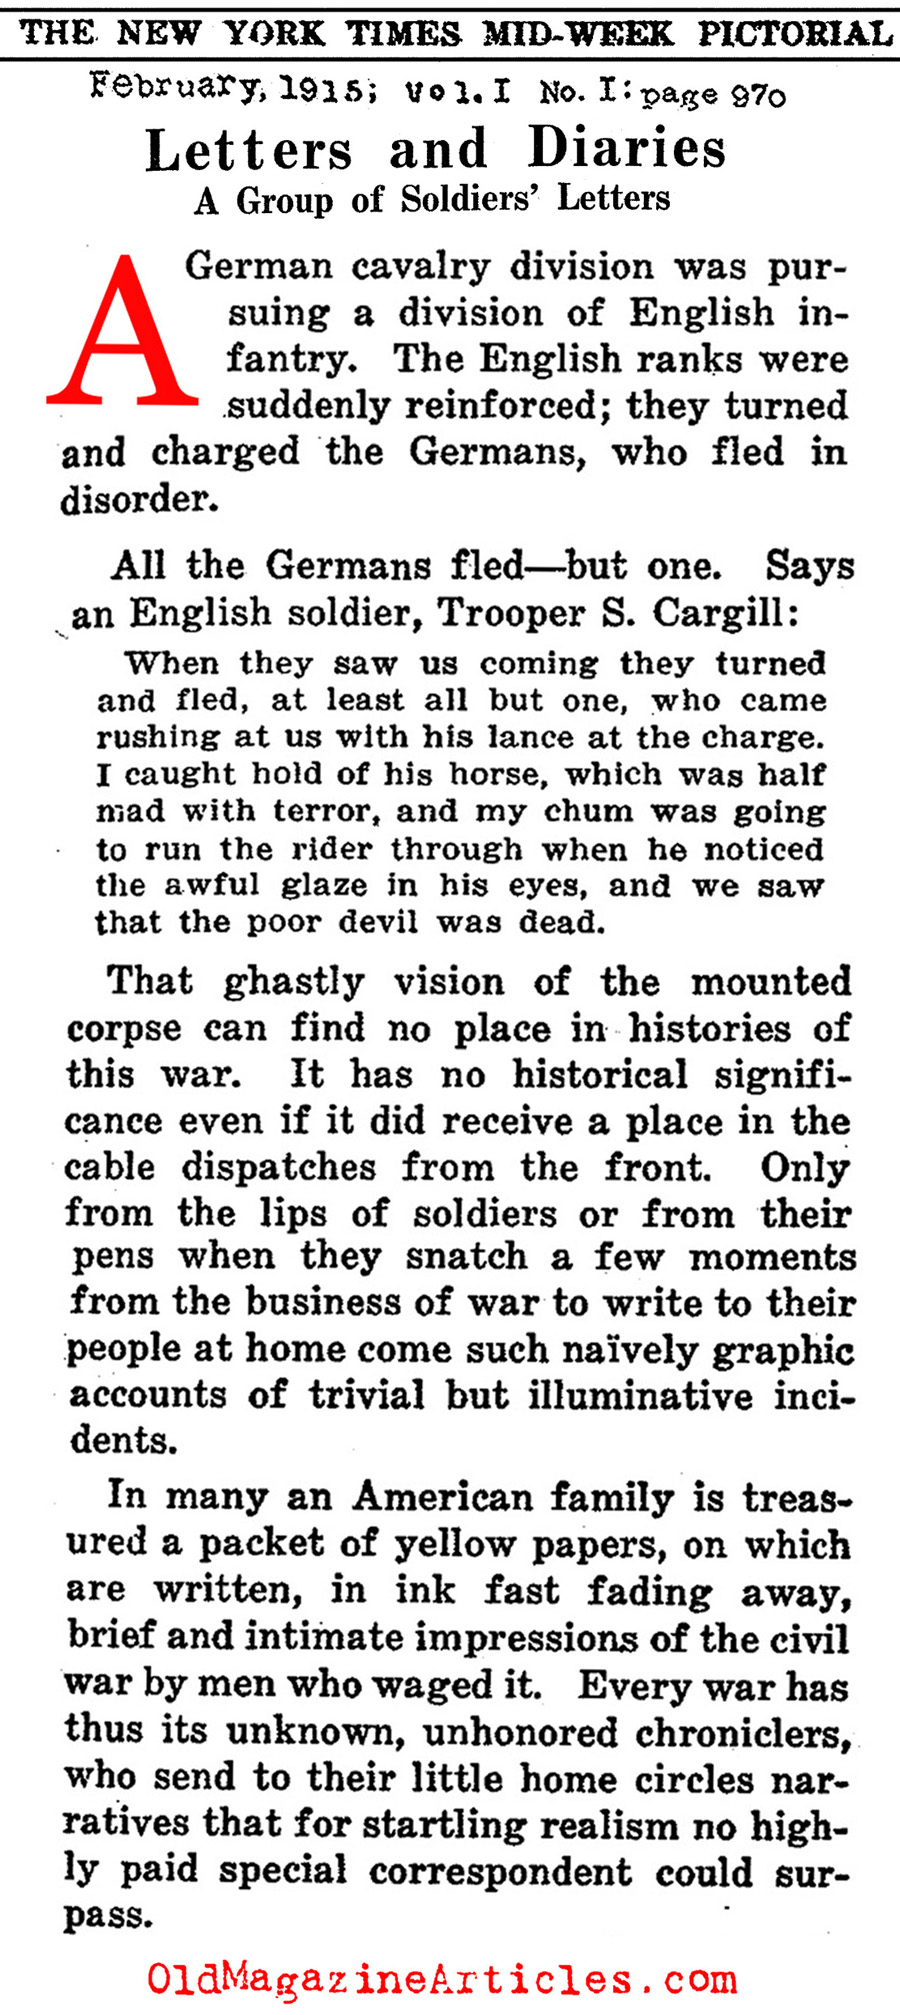 Tales of the Mounted German Corpse (New York Times, 1915)